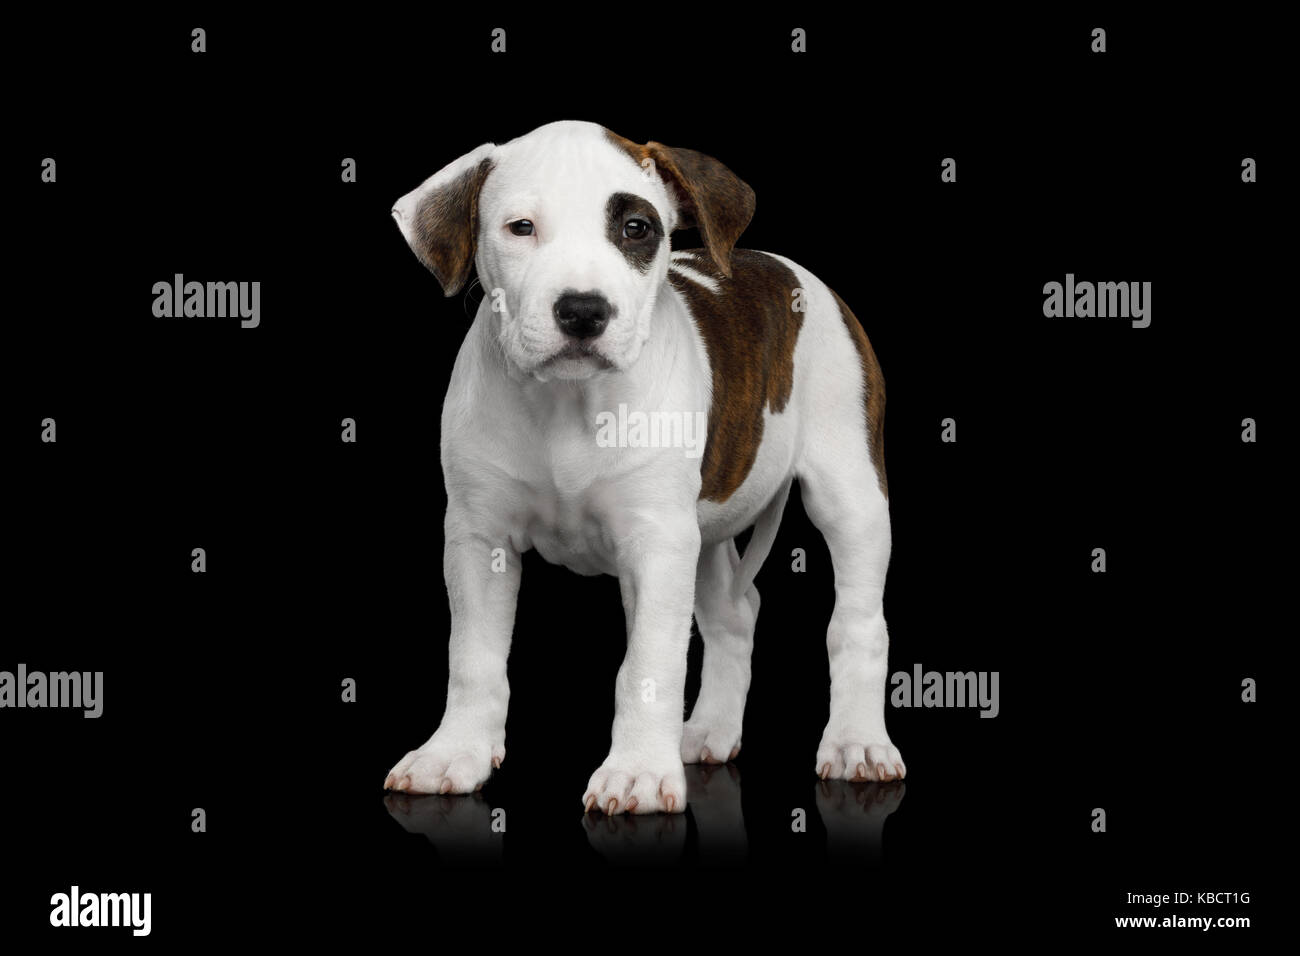 American Staffordshire Terrier puppy Stock Photo